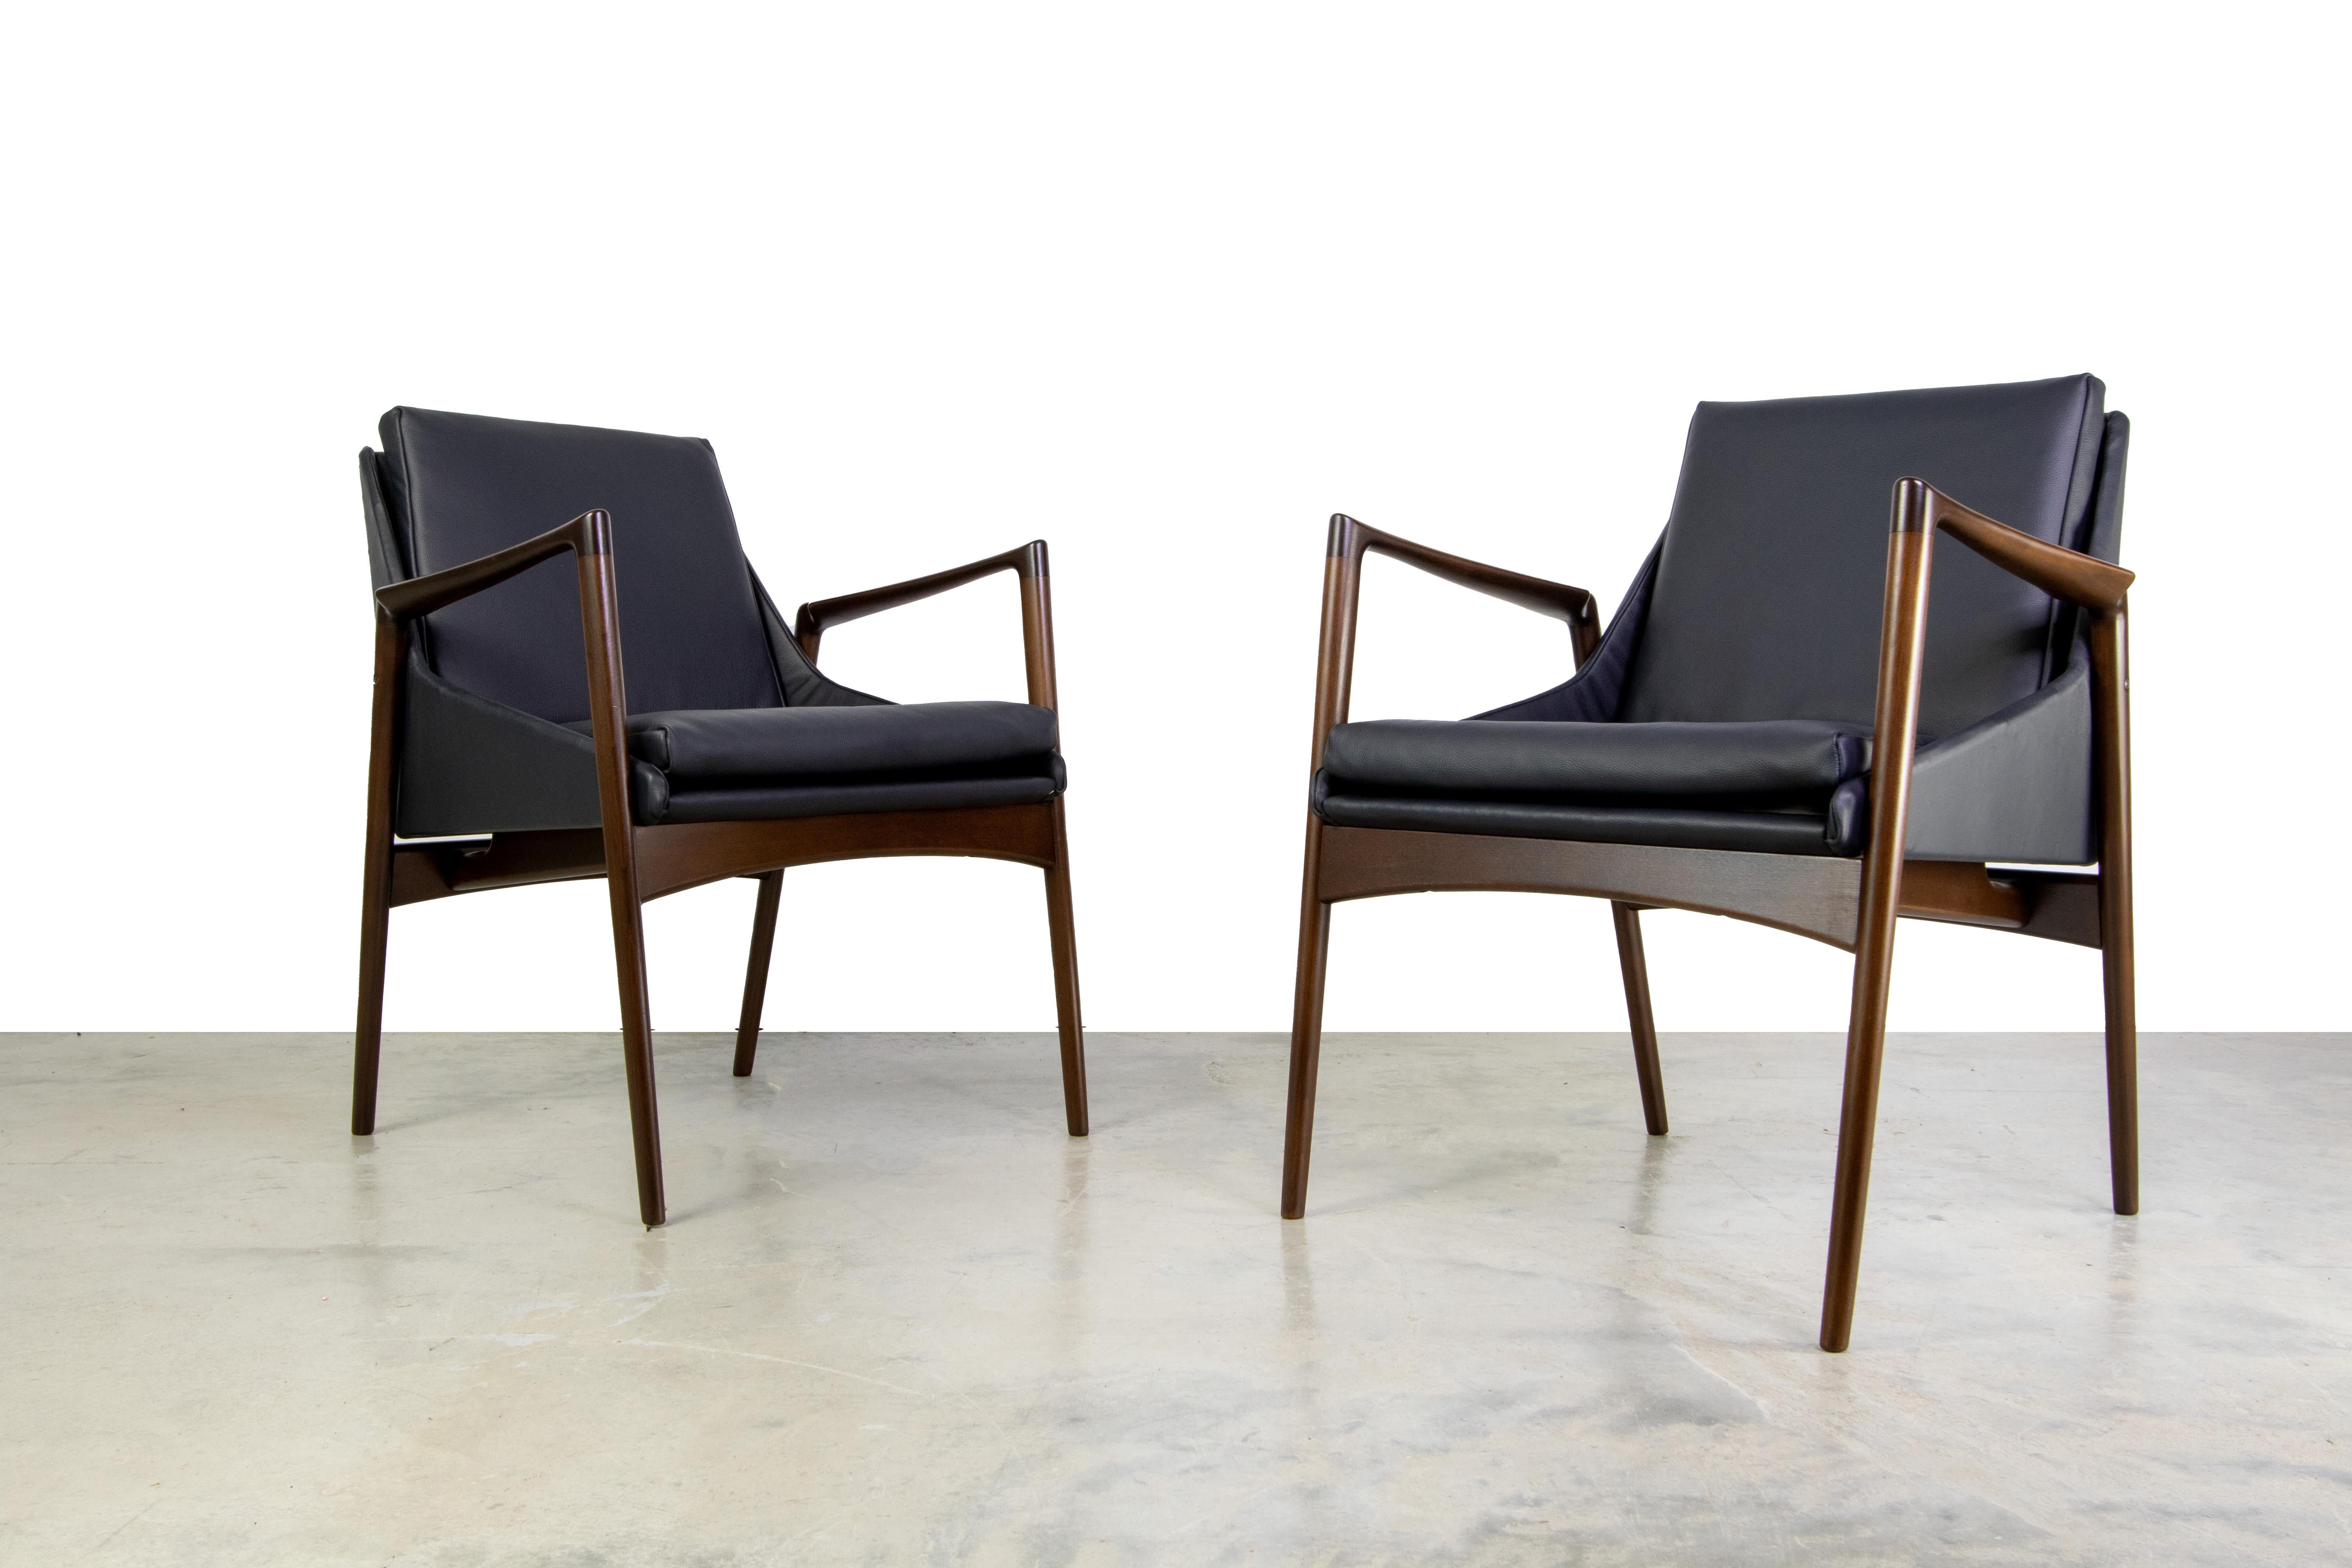 Pair of Ib Kofod Larsen for Selig Lounge chairs. These chairs are a smaller scale and would work well in a living room as well as in front of a desk. The sculpted frames are made of solid beech stained in a dark walnut. The foam was replaced and the